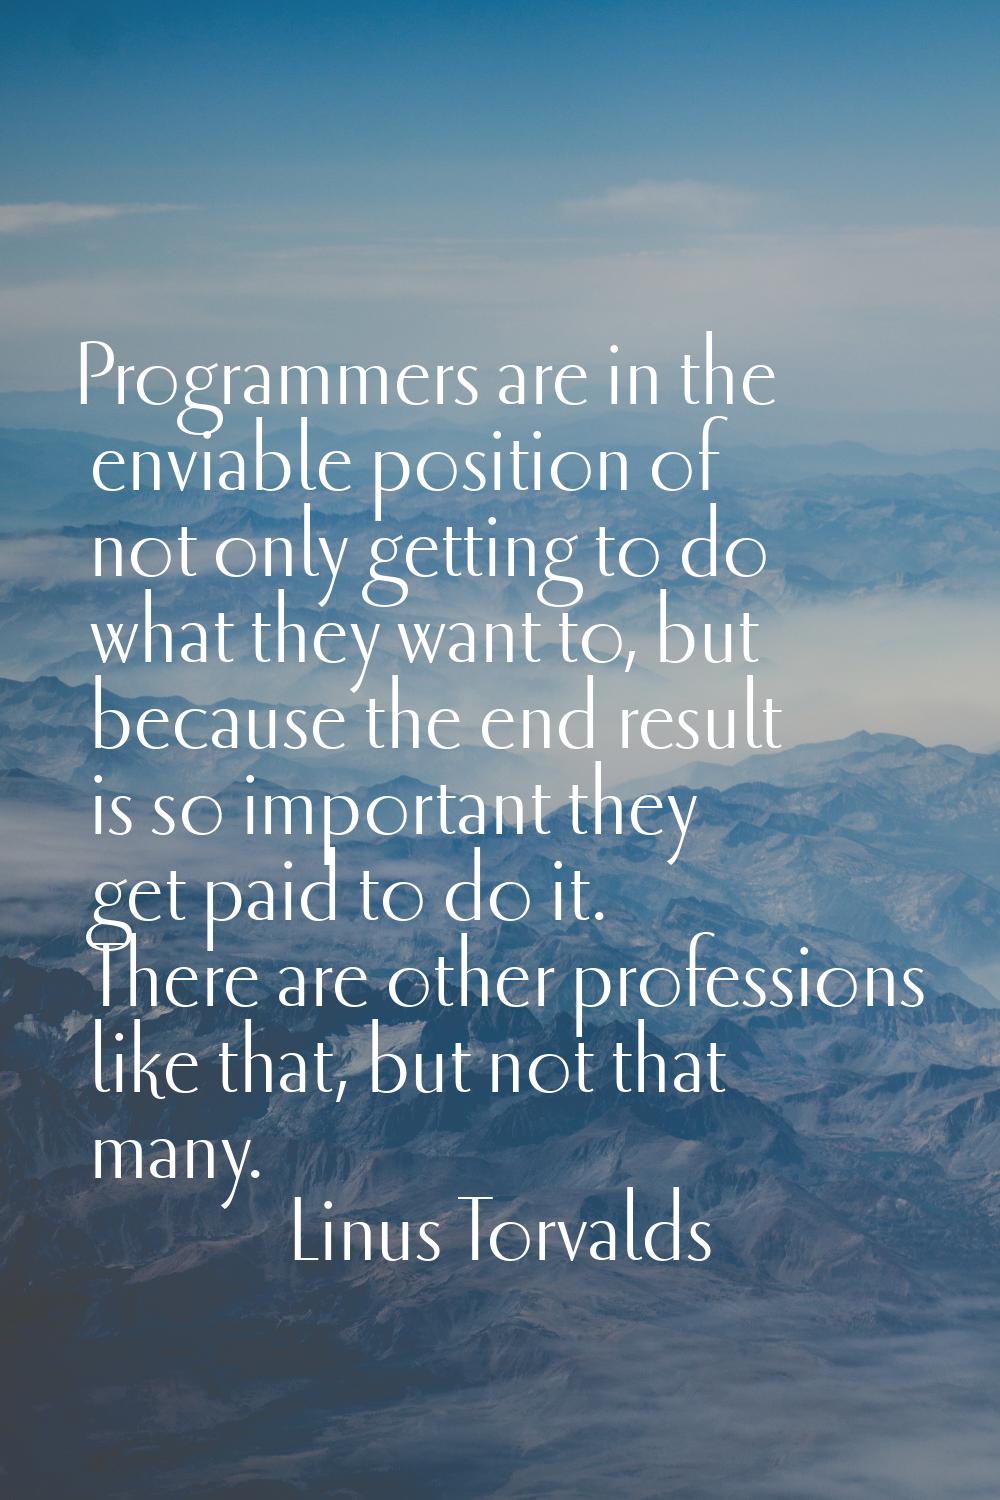 Programmers are in the enviable position of not only getting to do what they want to, but because t